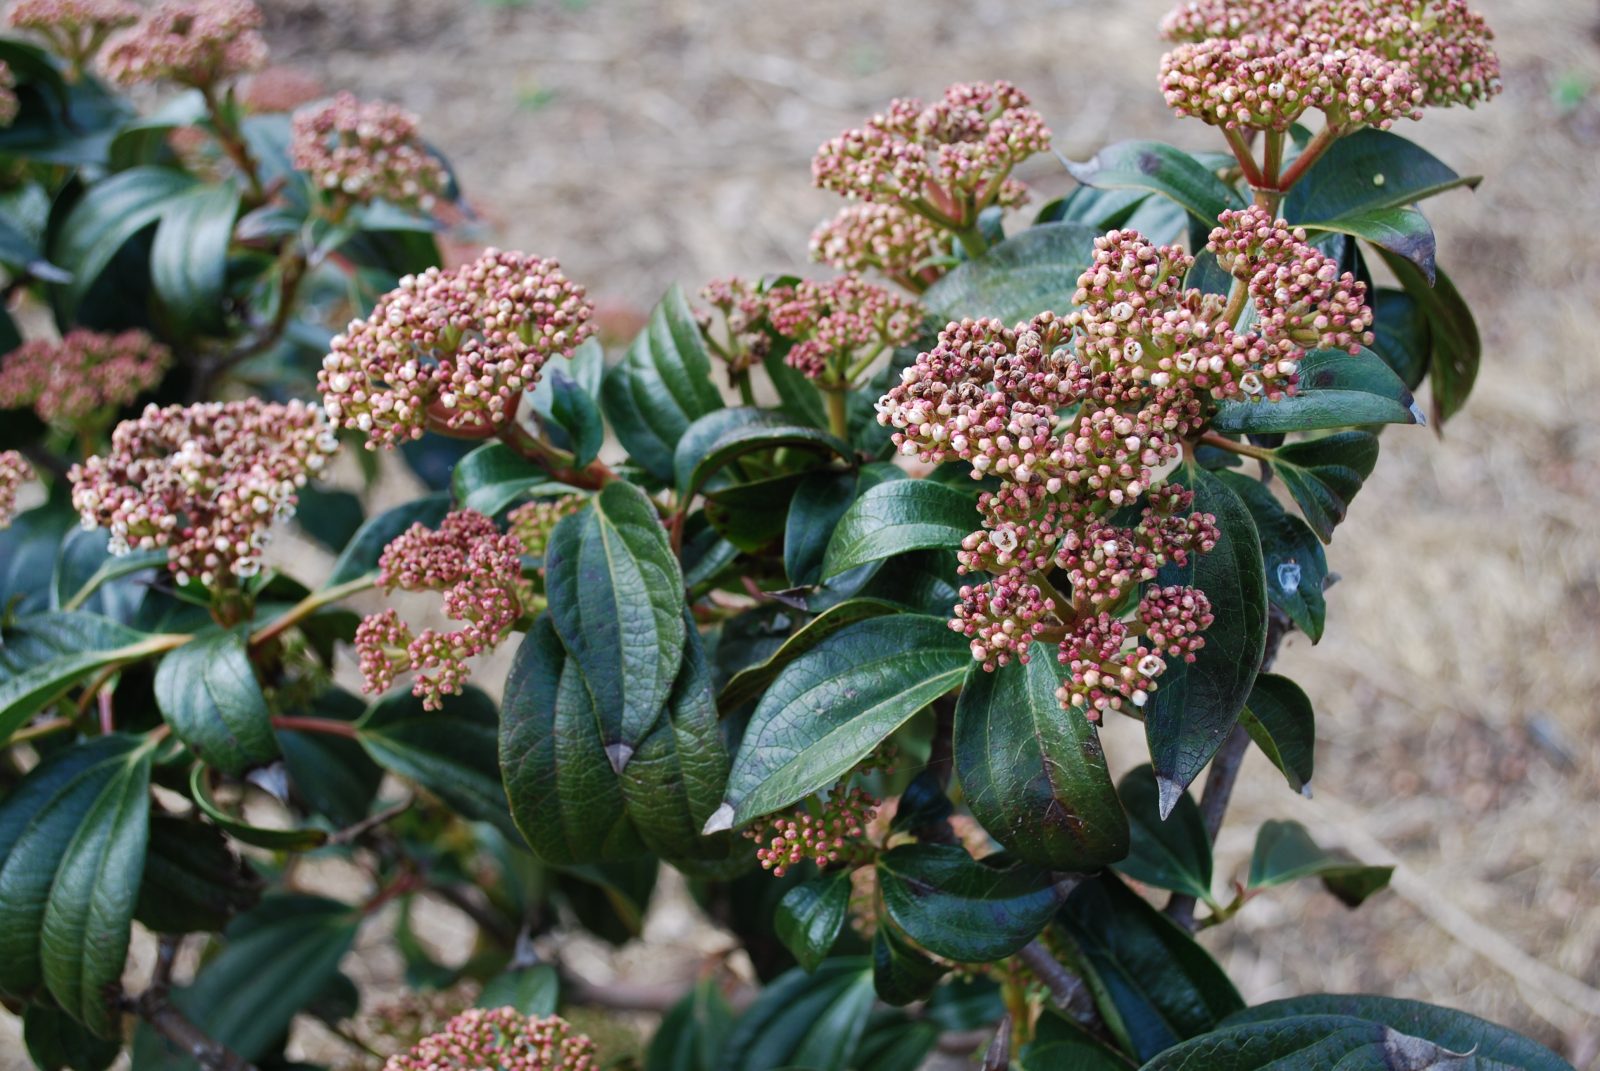 There are around 150 species of viburnum trees, shrubs, and hedge plants. 